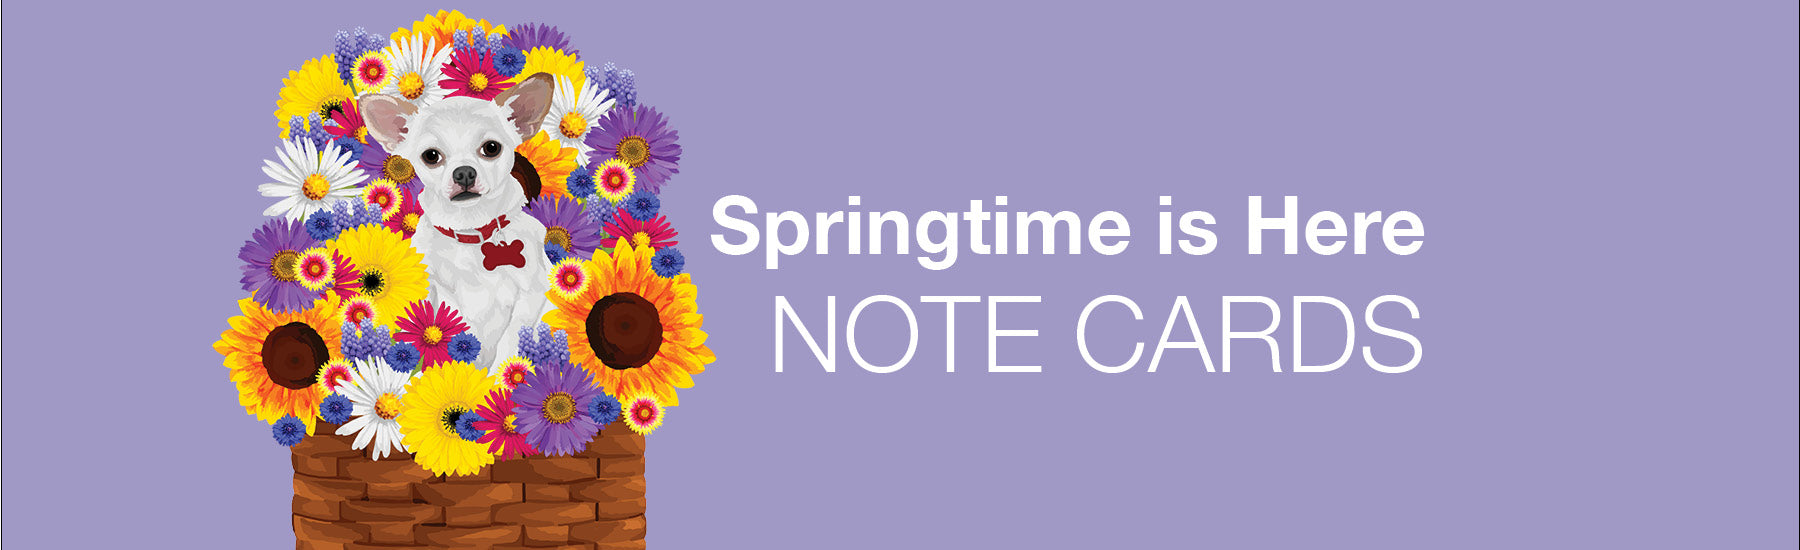 SPRING NOTE CARDS